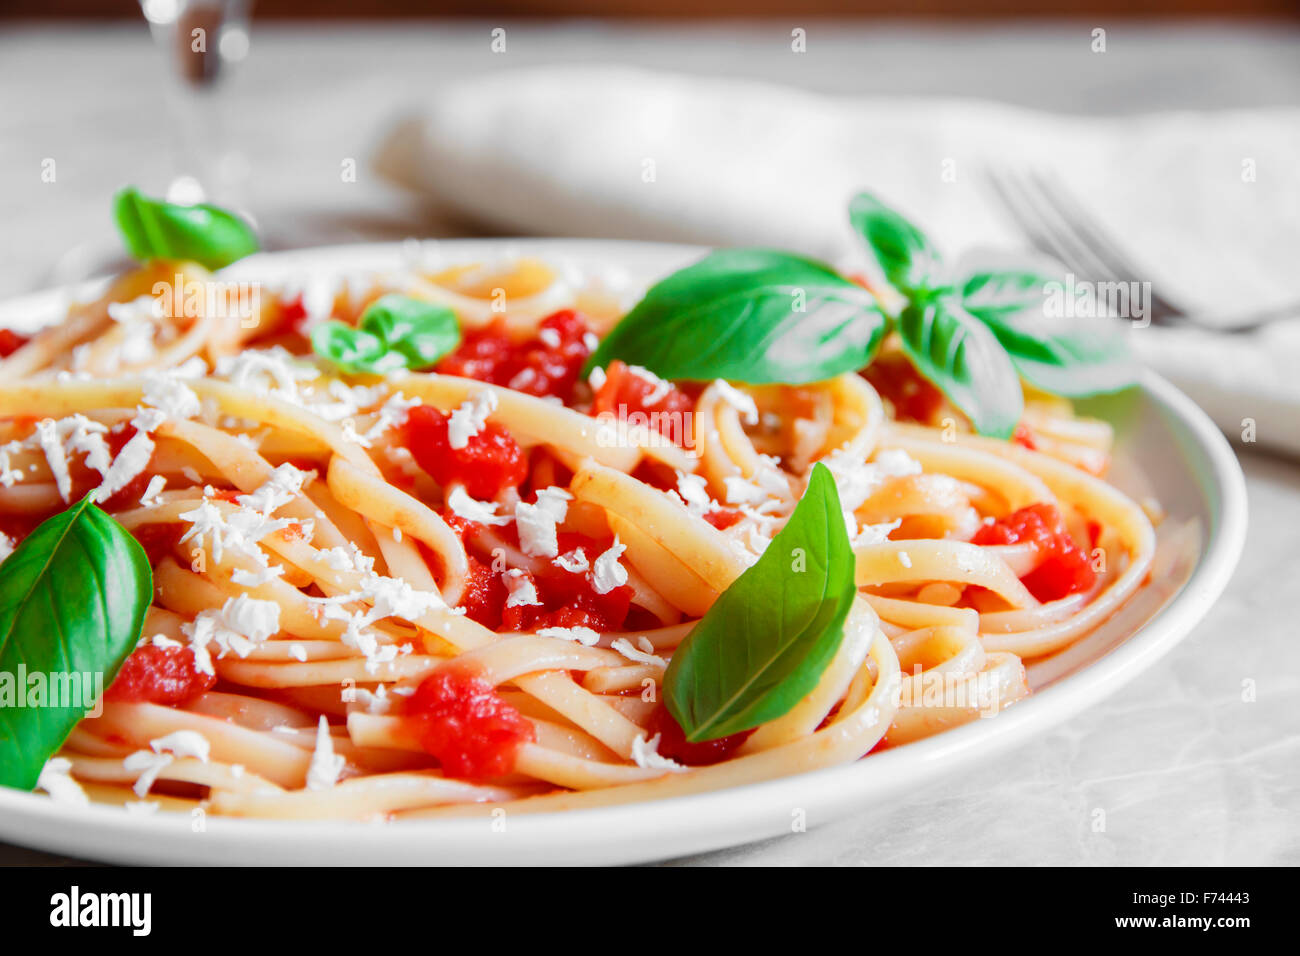 Linguine pasta in tomato sauce and cheese on a plate Stock Photo